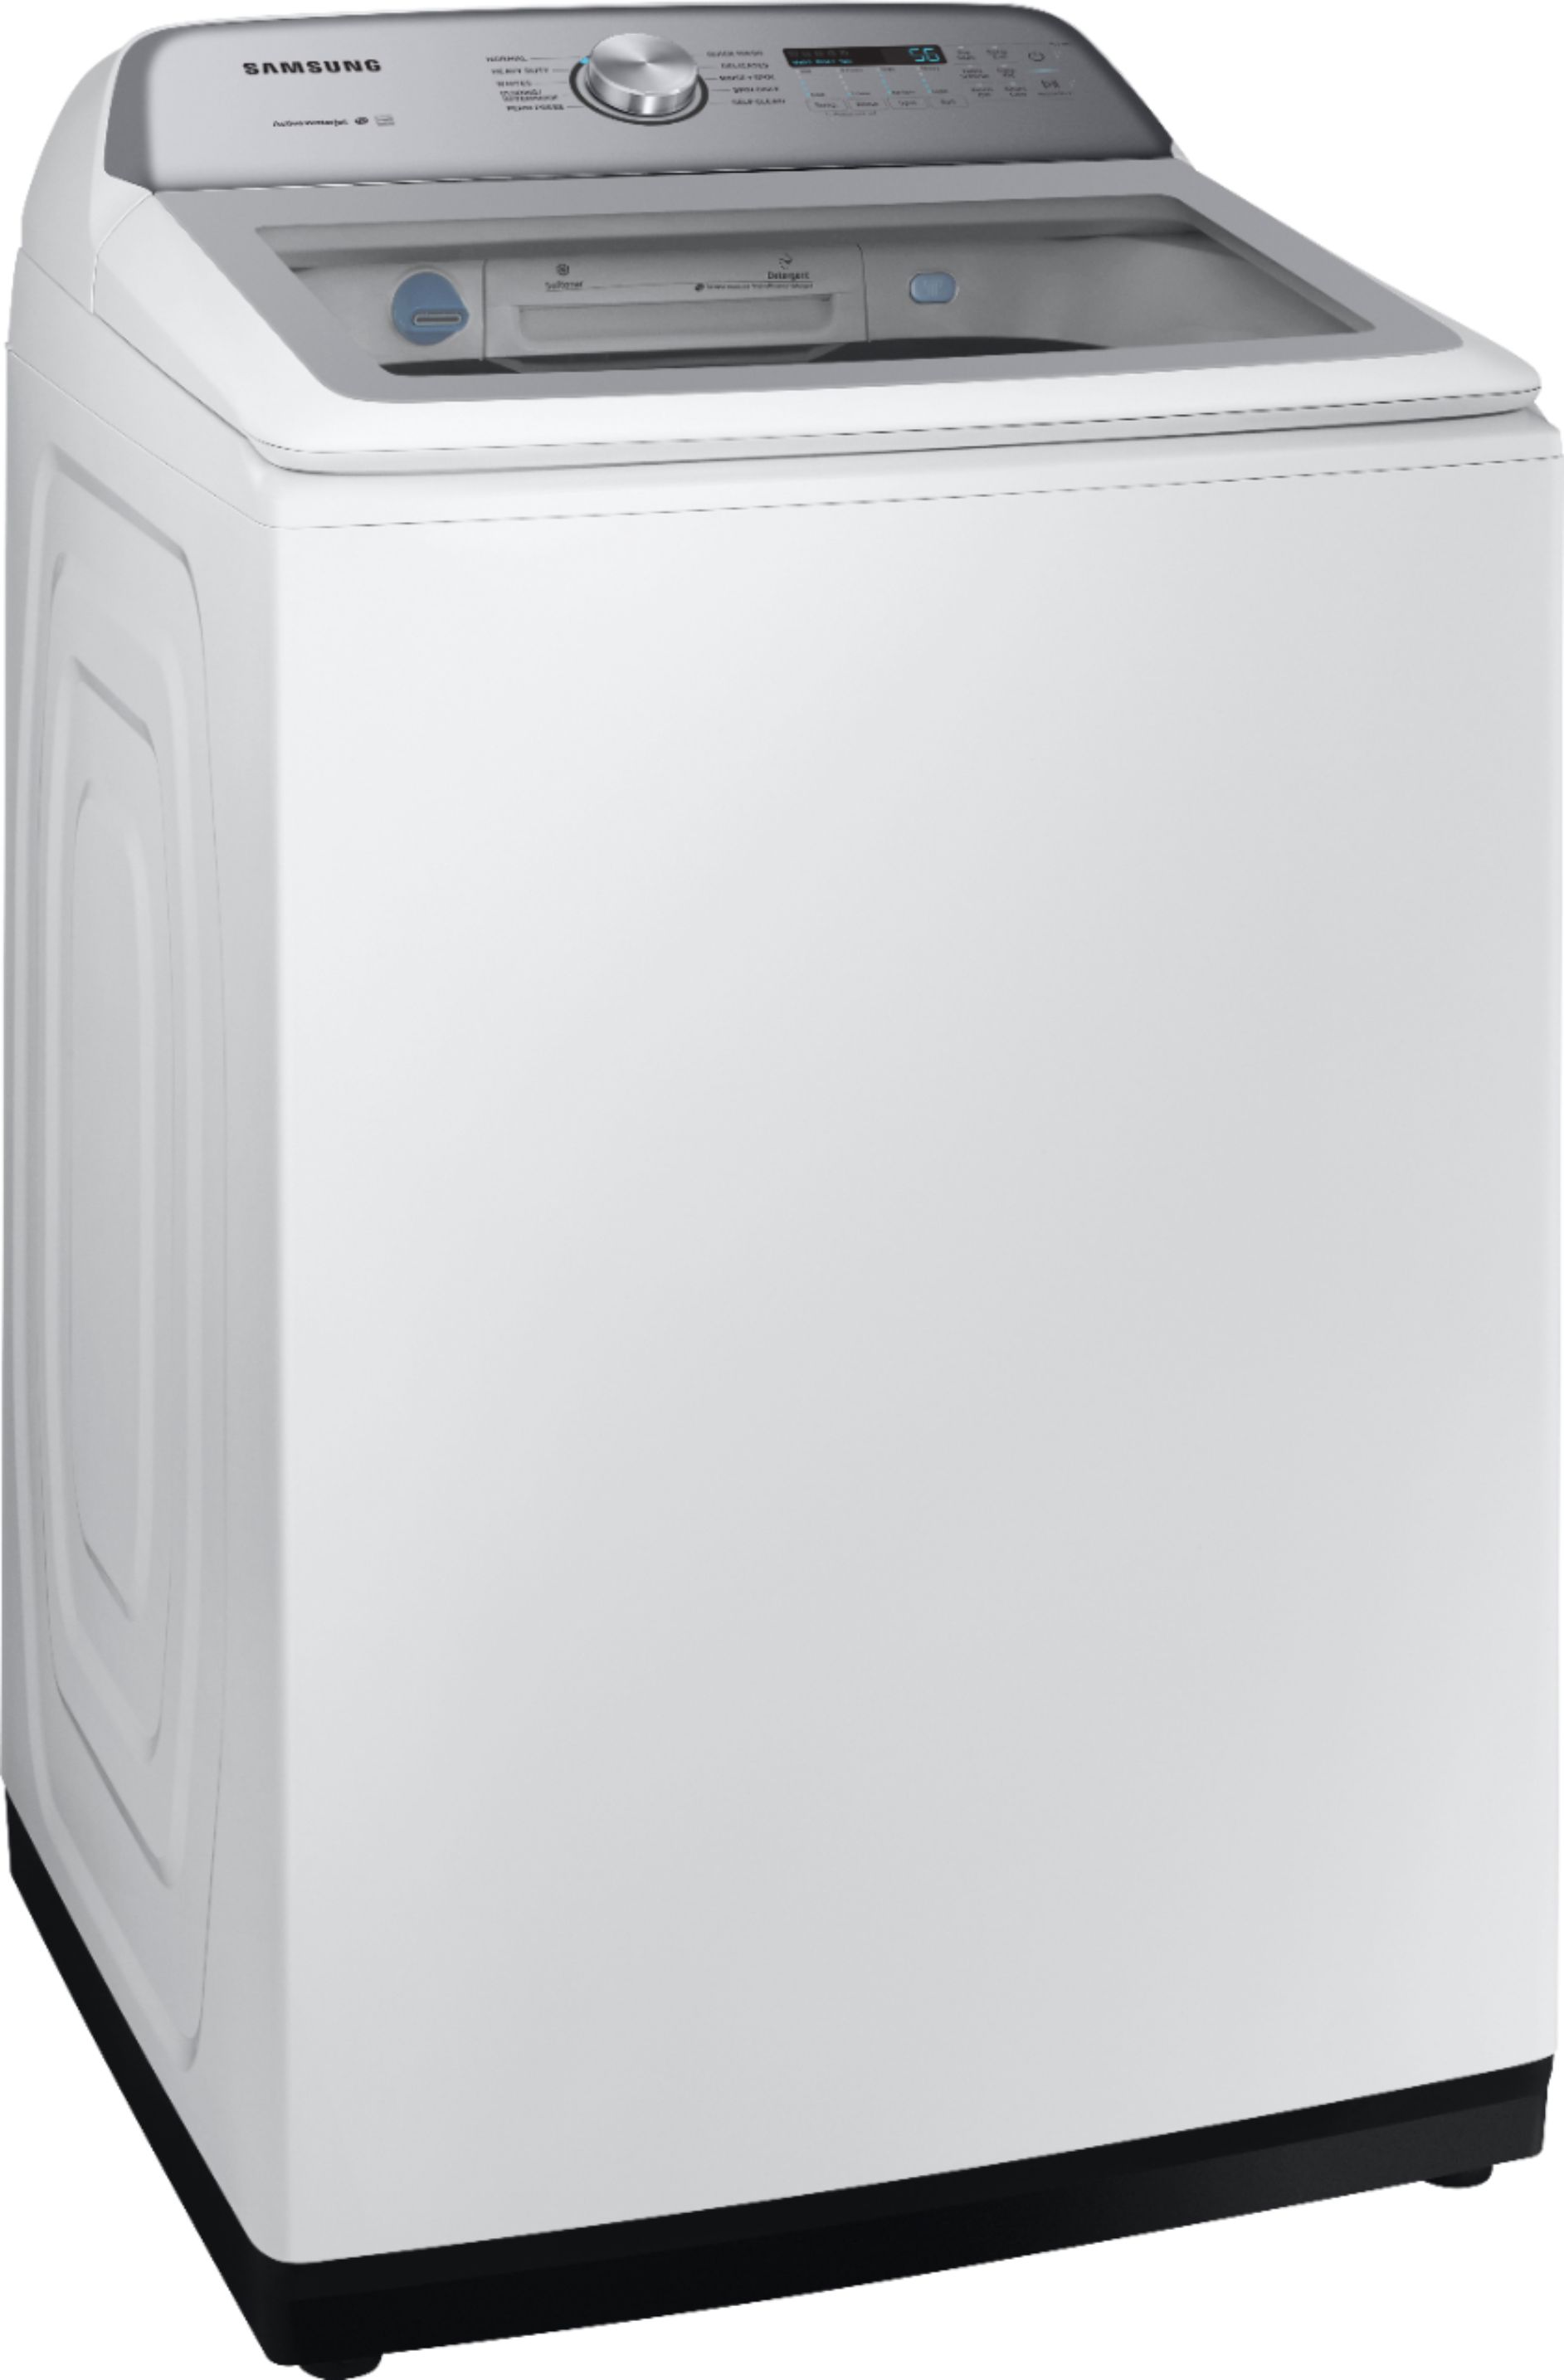 Angle View: Samsung - 5.0 Cu. Ft. High-Efficiency Top Load Washer with Active WaterJet - White